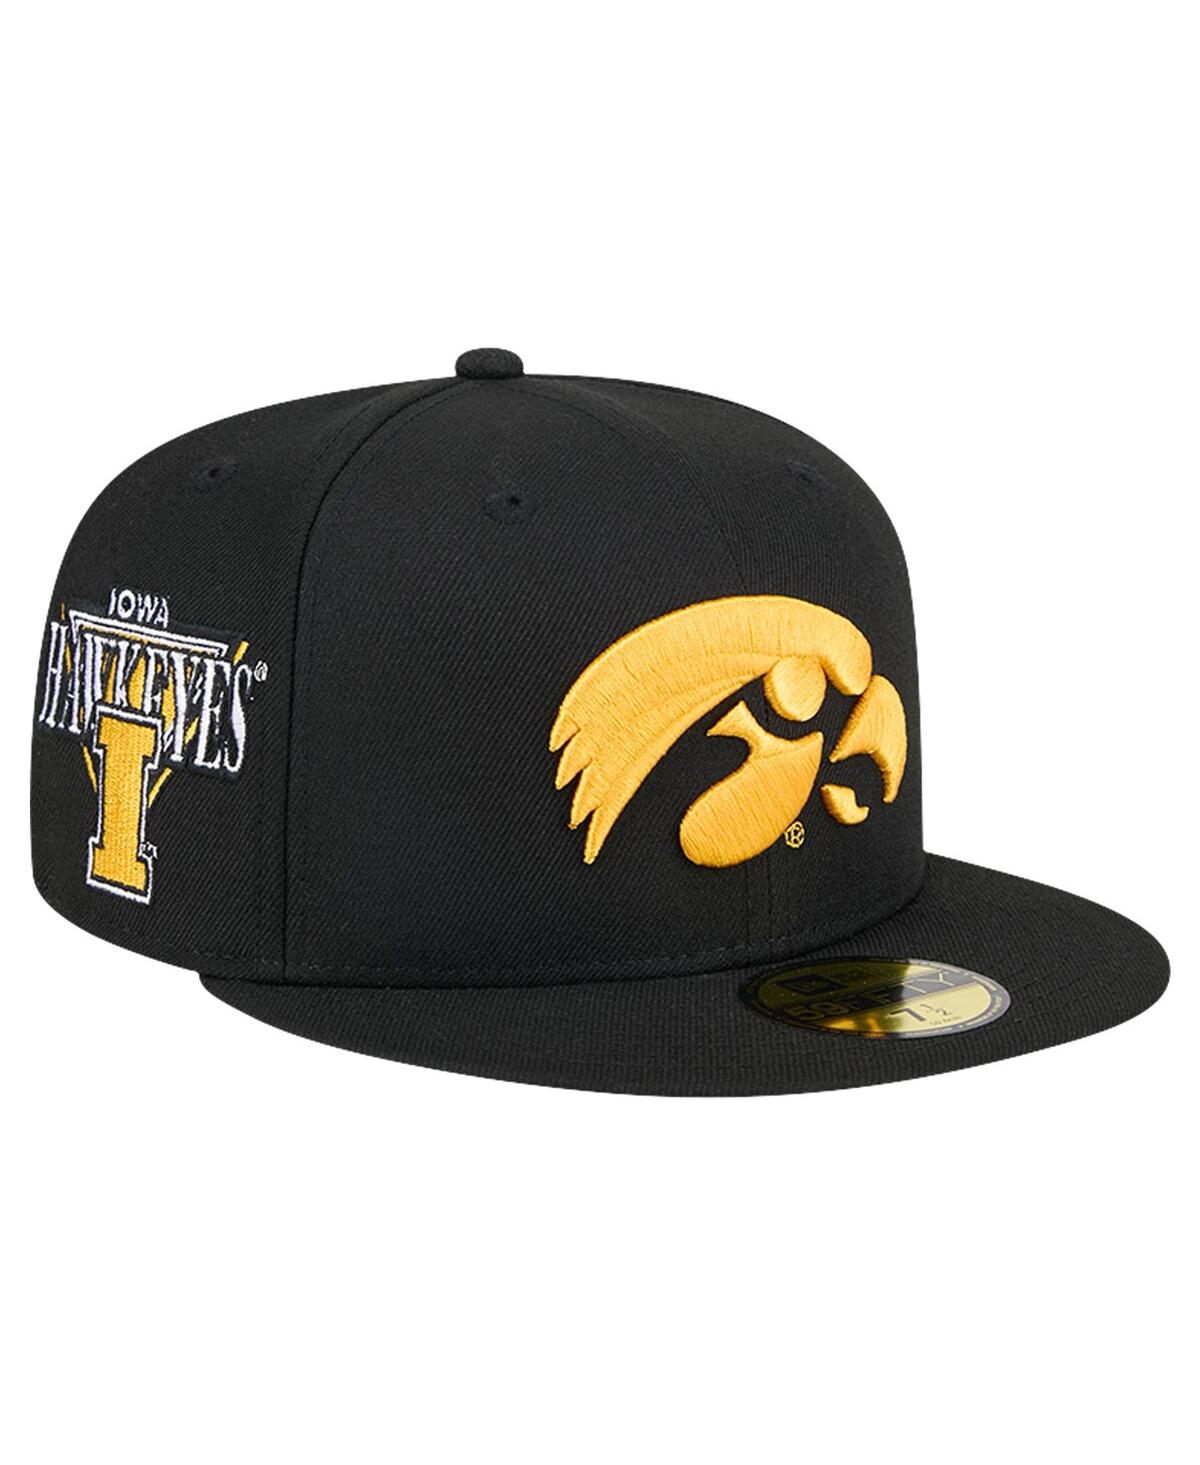 Men's Black Iowa Hawkeyes Throwback 59fifty Fitted Hat - Black